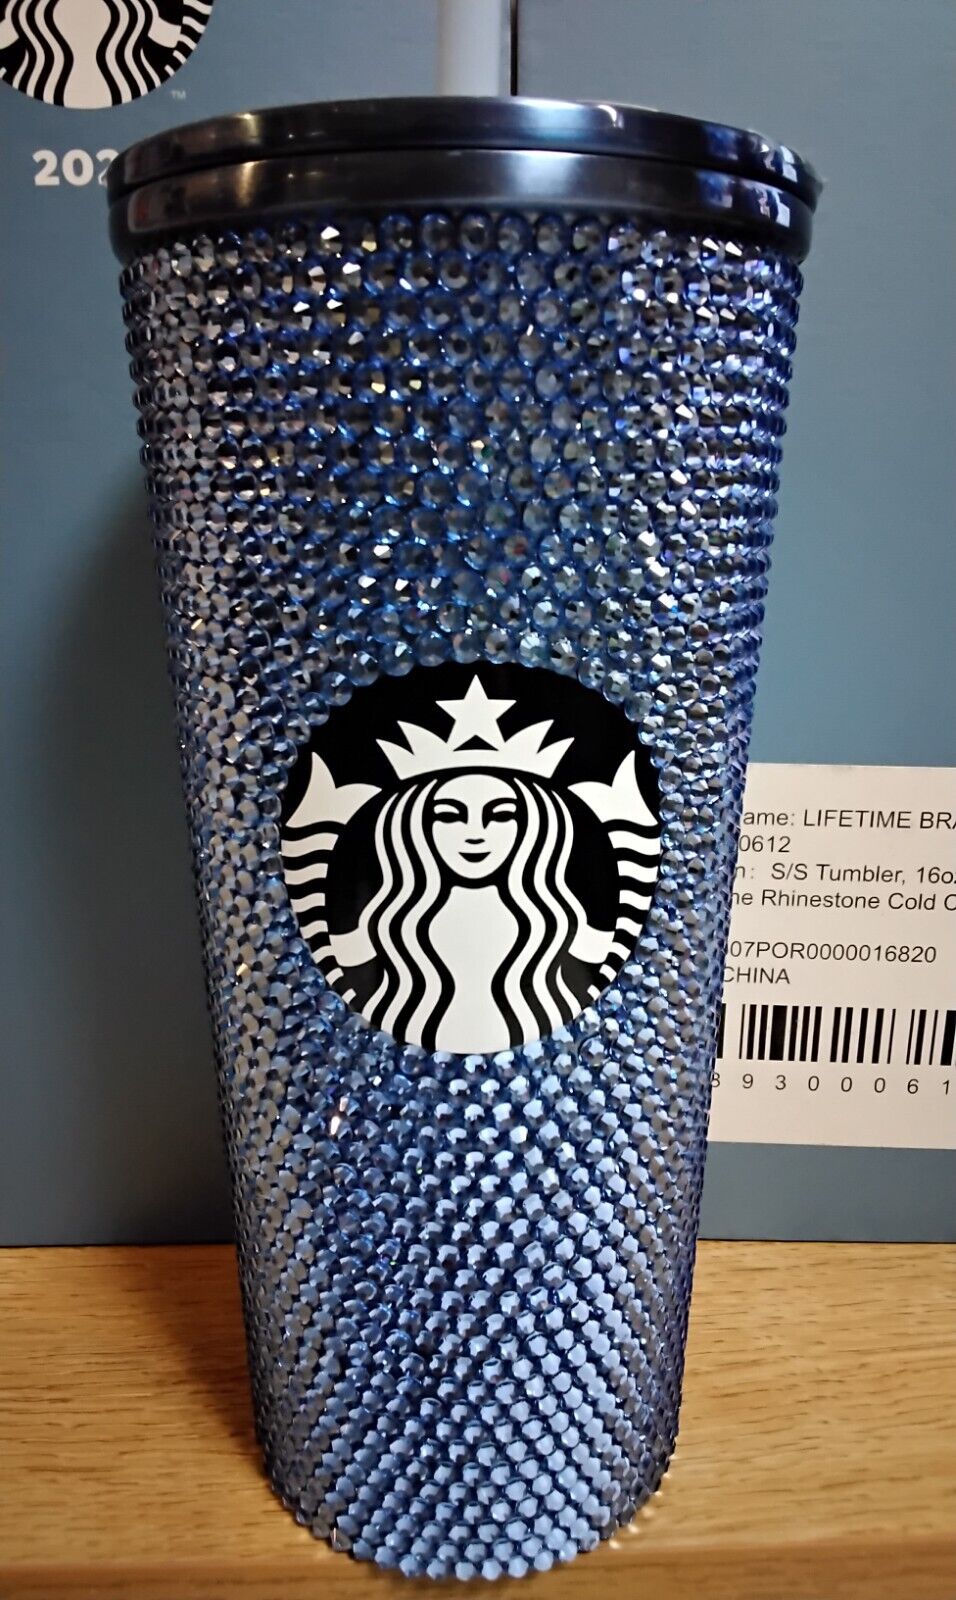 2023 STARBUCKS PHILIPPINES BLUE RHINESTONE STAINLESS STEEL COLD CUP NEW W/ BOX